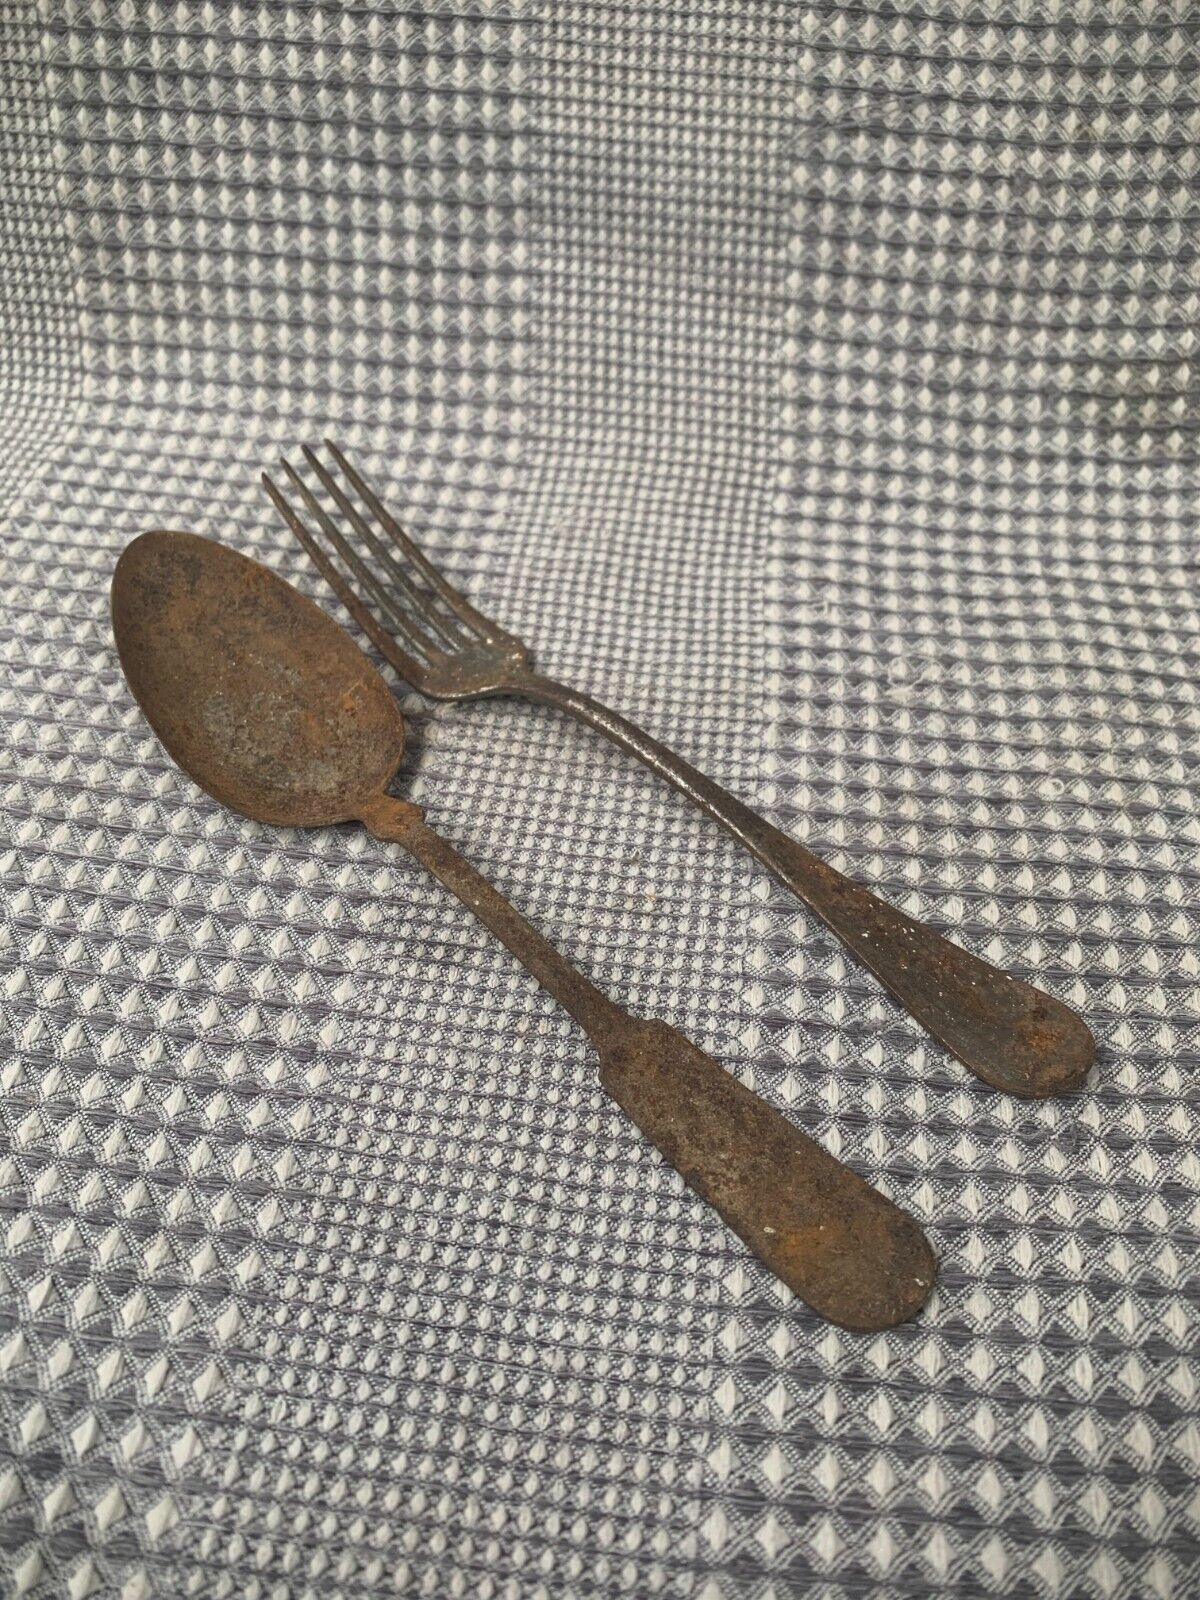 German original. Set of spoon and fork from Wehrmacht positions. 1936-1945 WW2